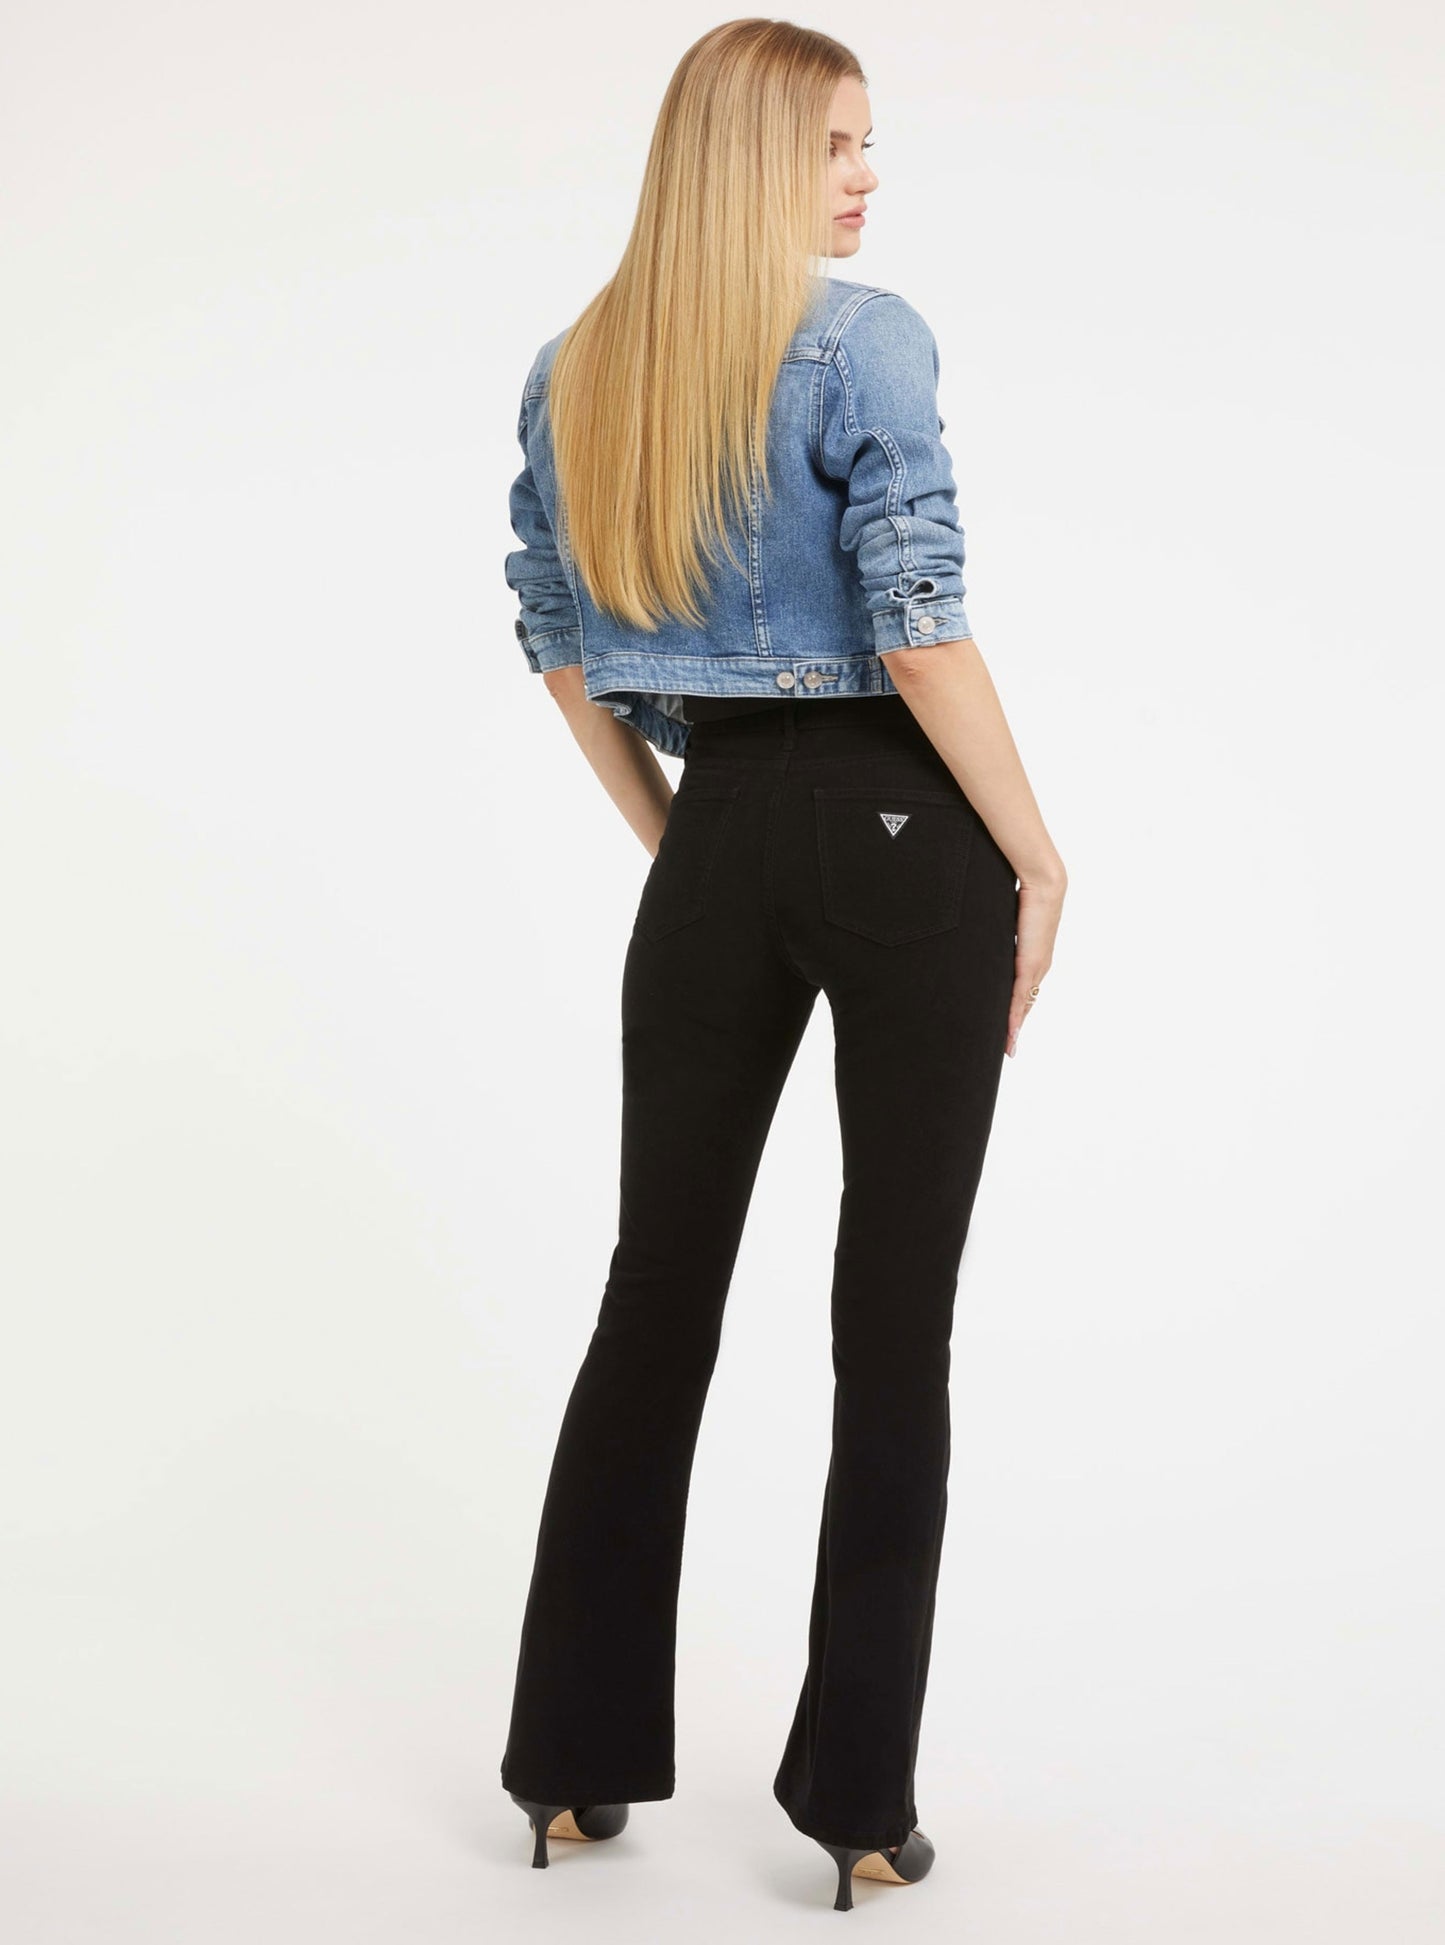 Eco Black Sexy Flare Velvet Pants | GUESS Women's Apparel | Back view full